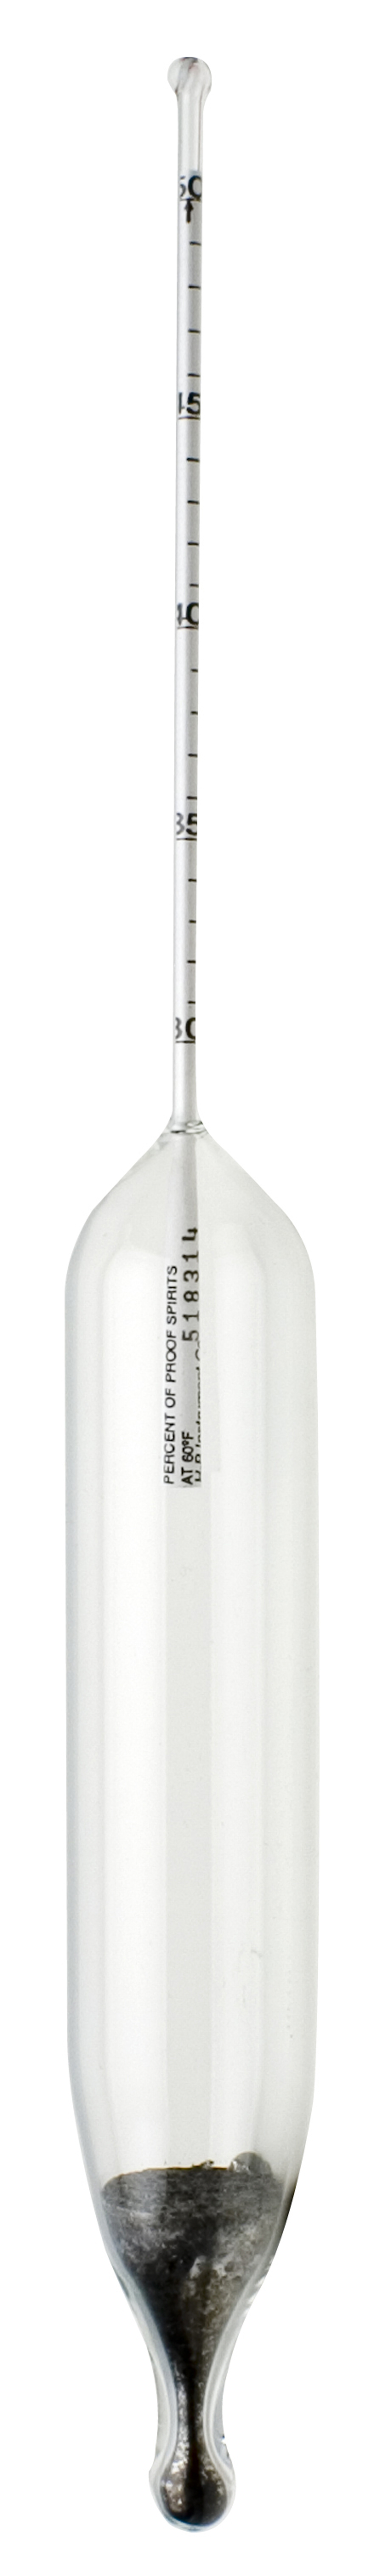 H-B DURAC Alcohol Proof Hydrometers; Traceable to NIST